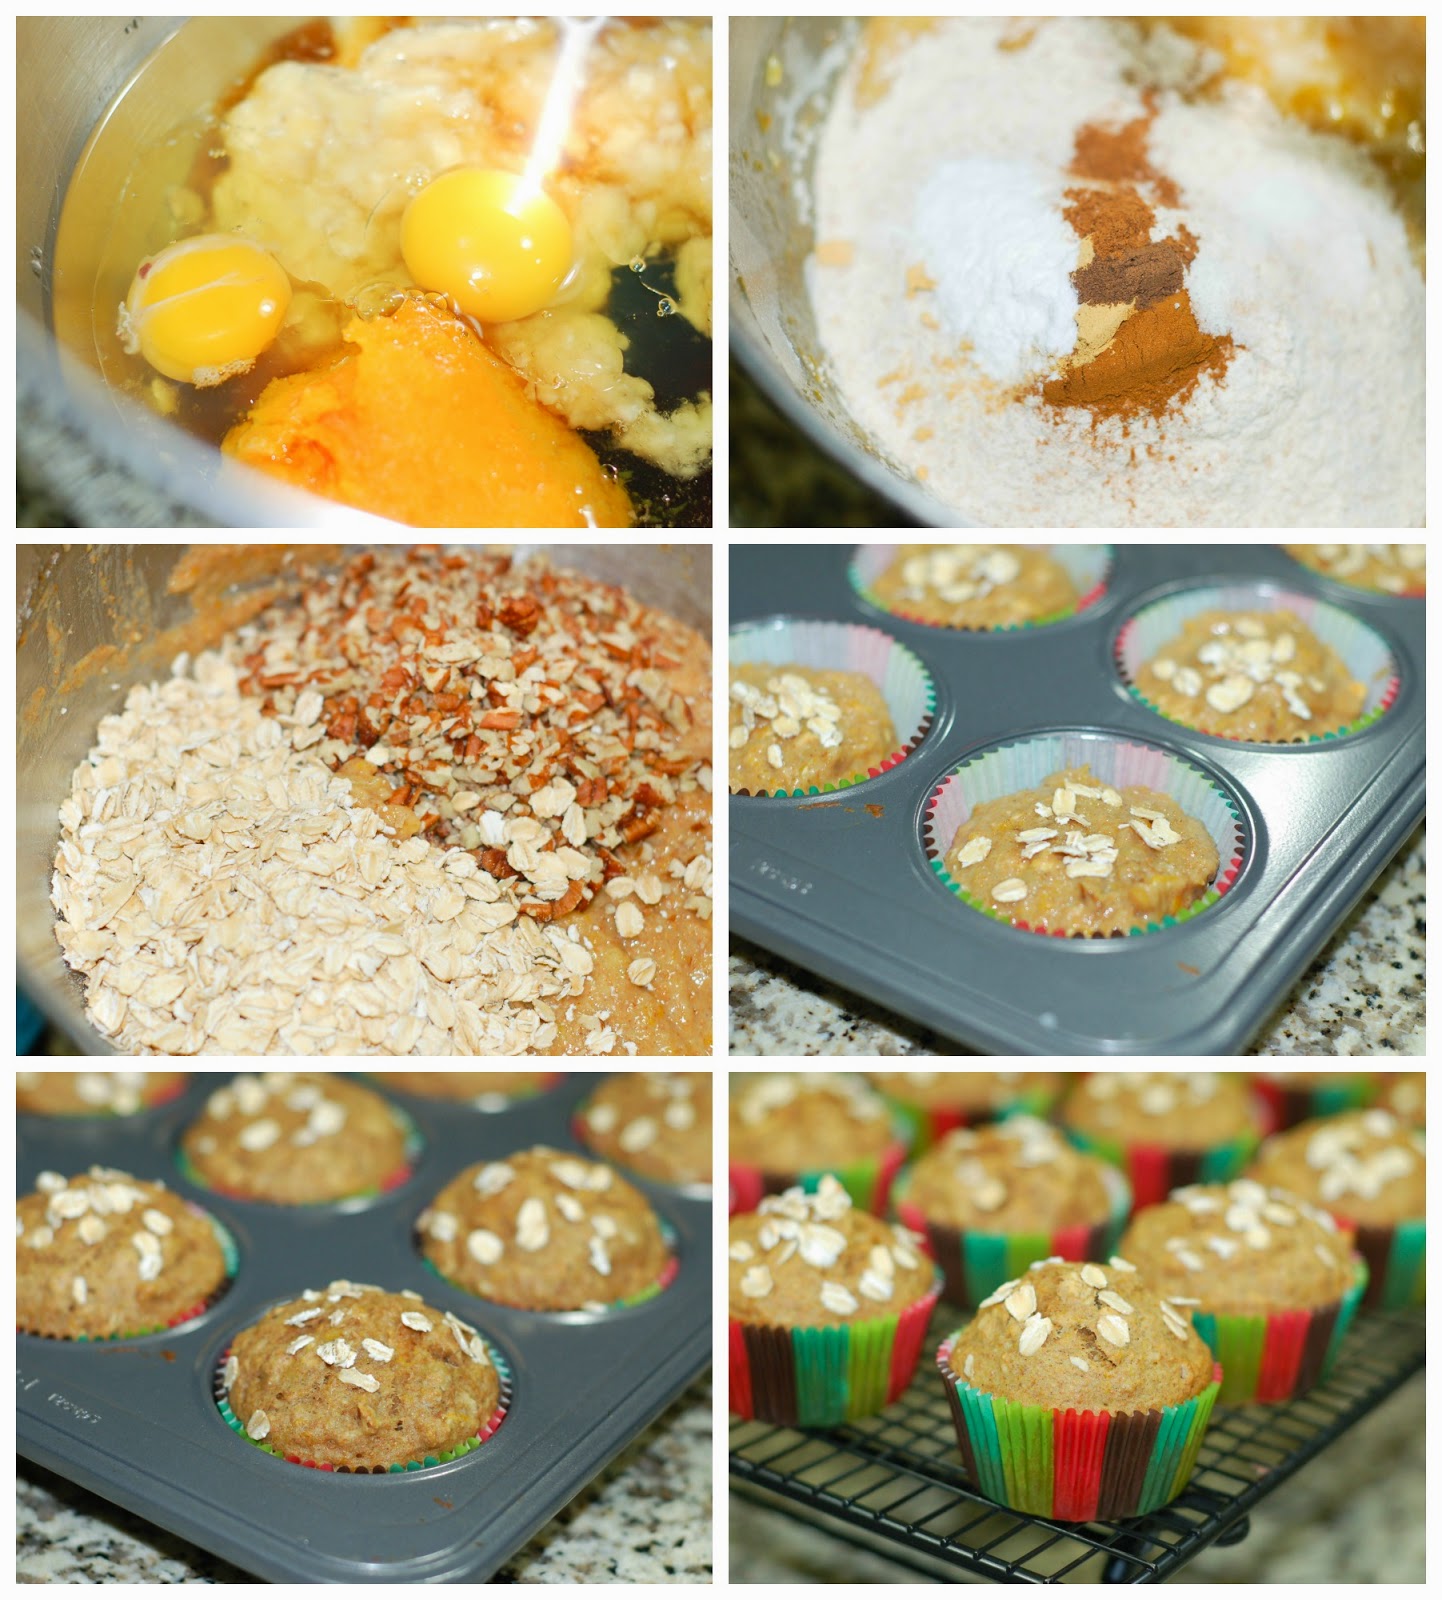 Making Butternut Squash Muffins by The Sweet Chick